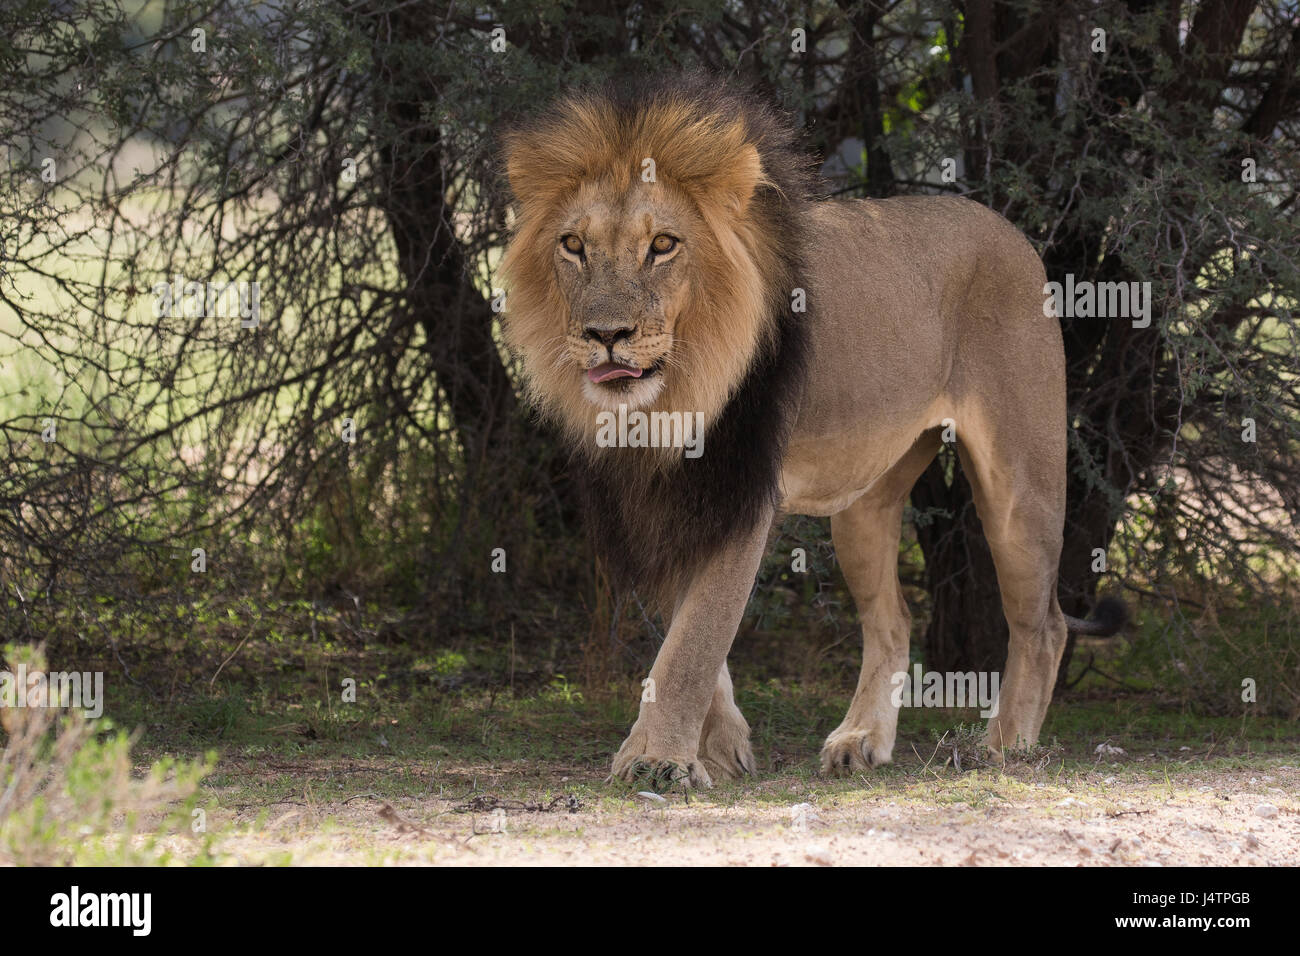 African male lion front view full body walking under a tree Stock Photo